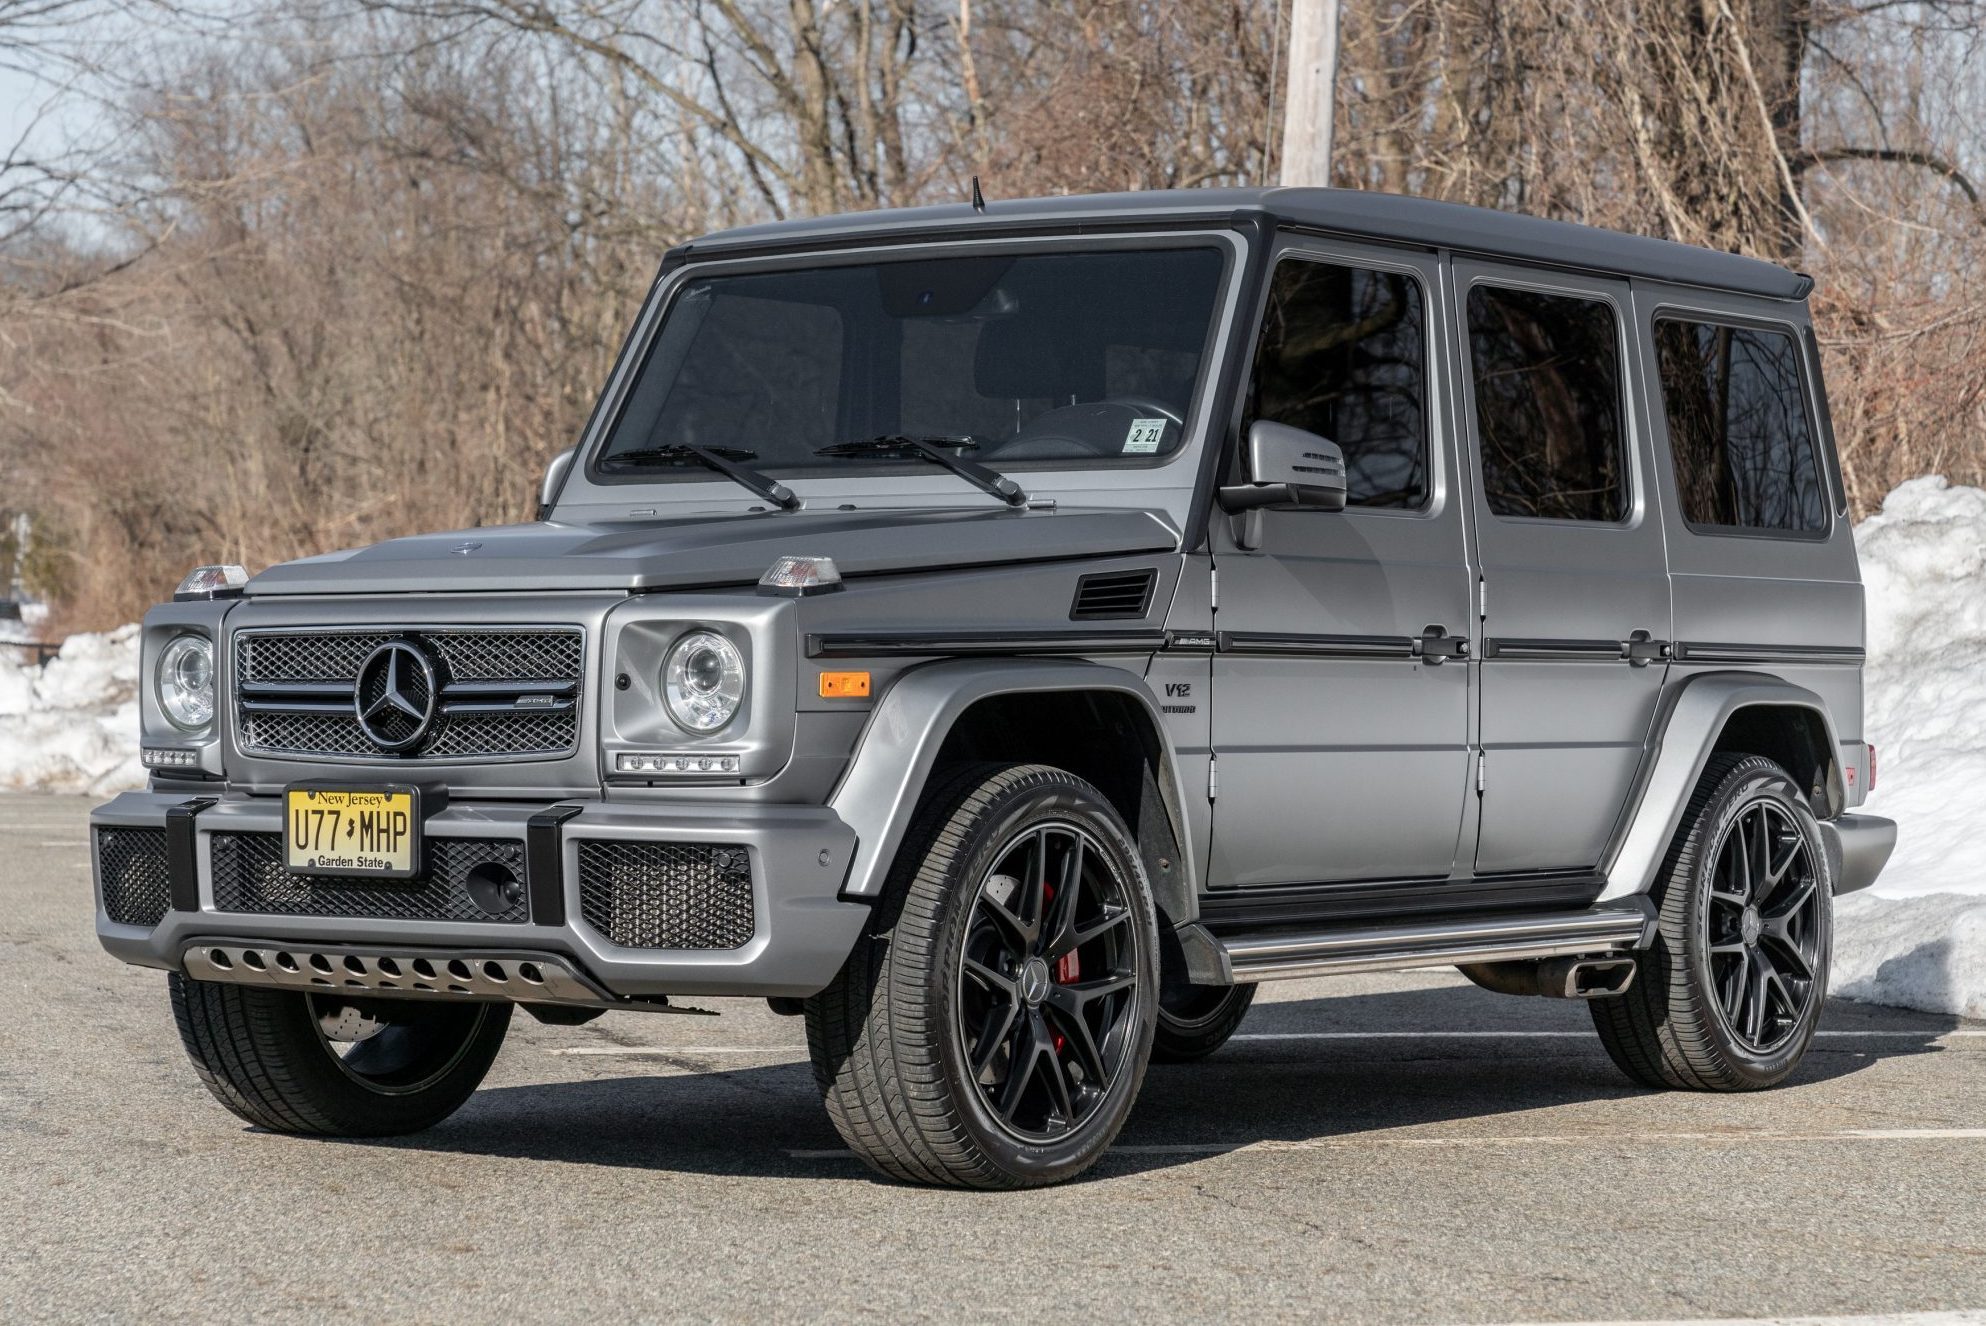 This 16 Mercedes Benz G65 Amg Is A Rare V12 Powered Beast Carscoops